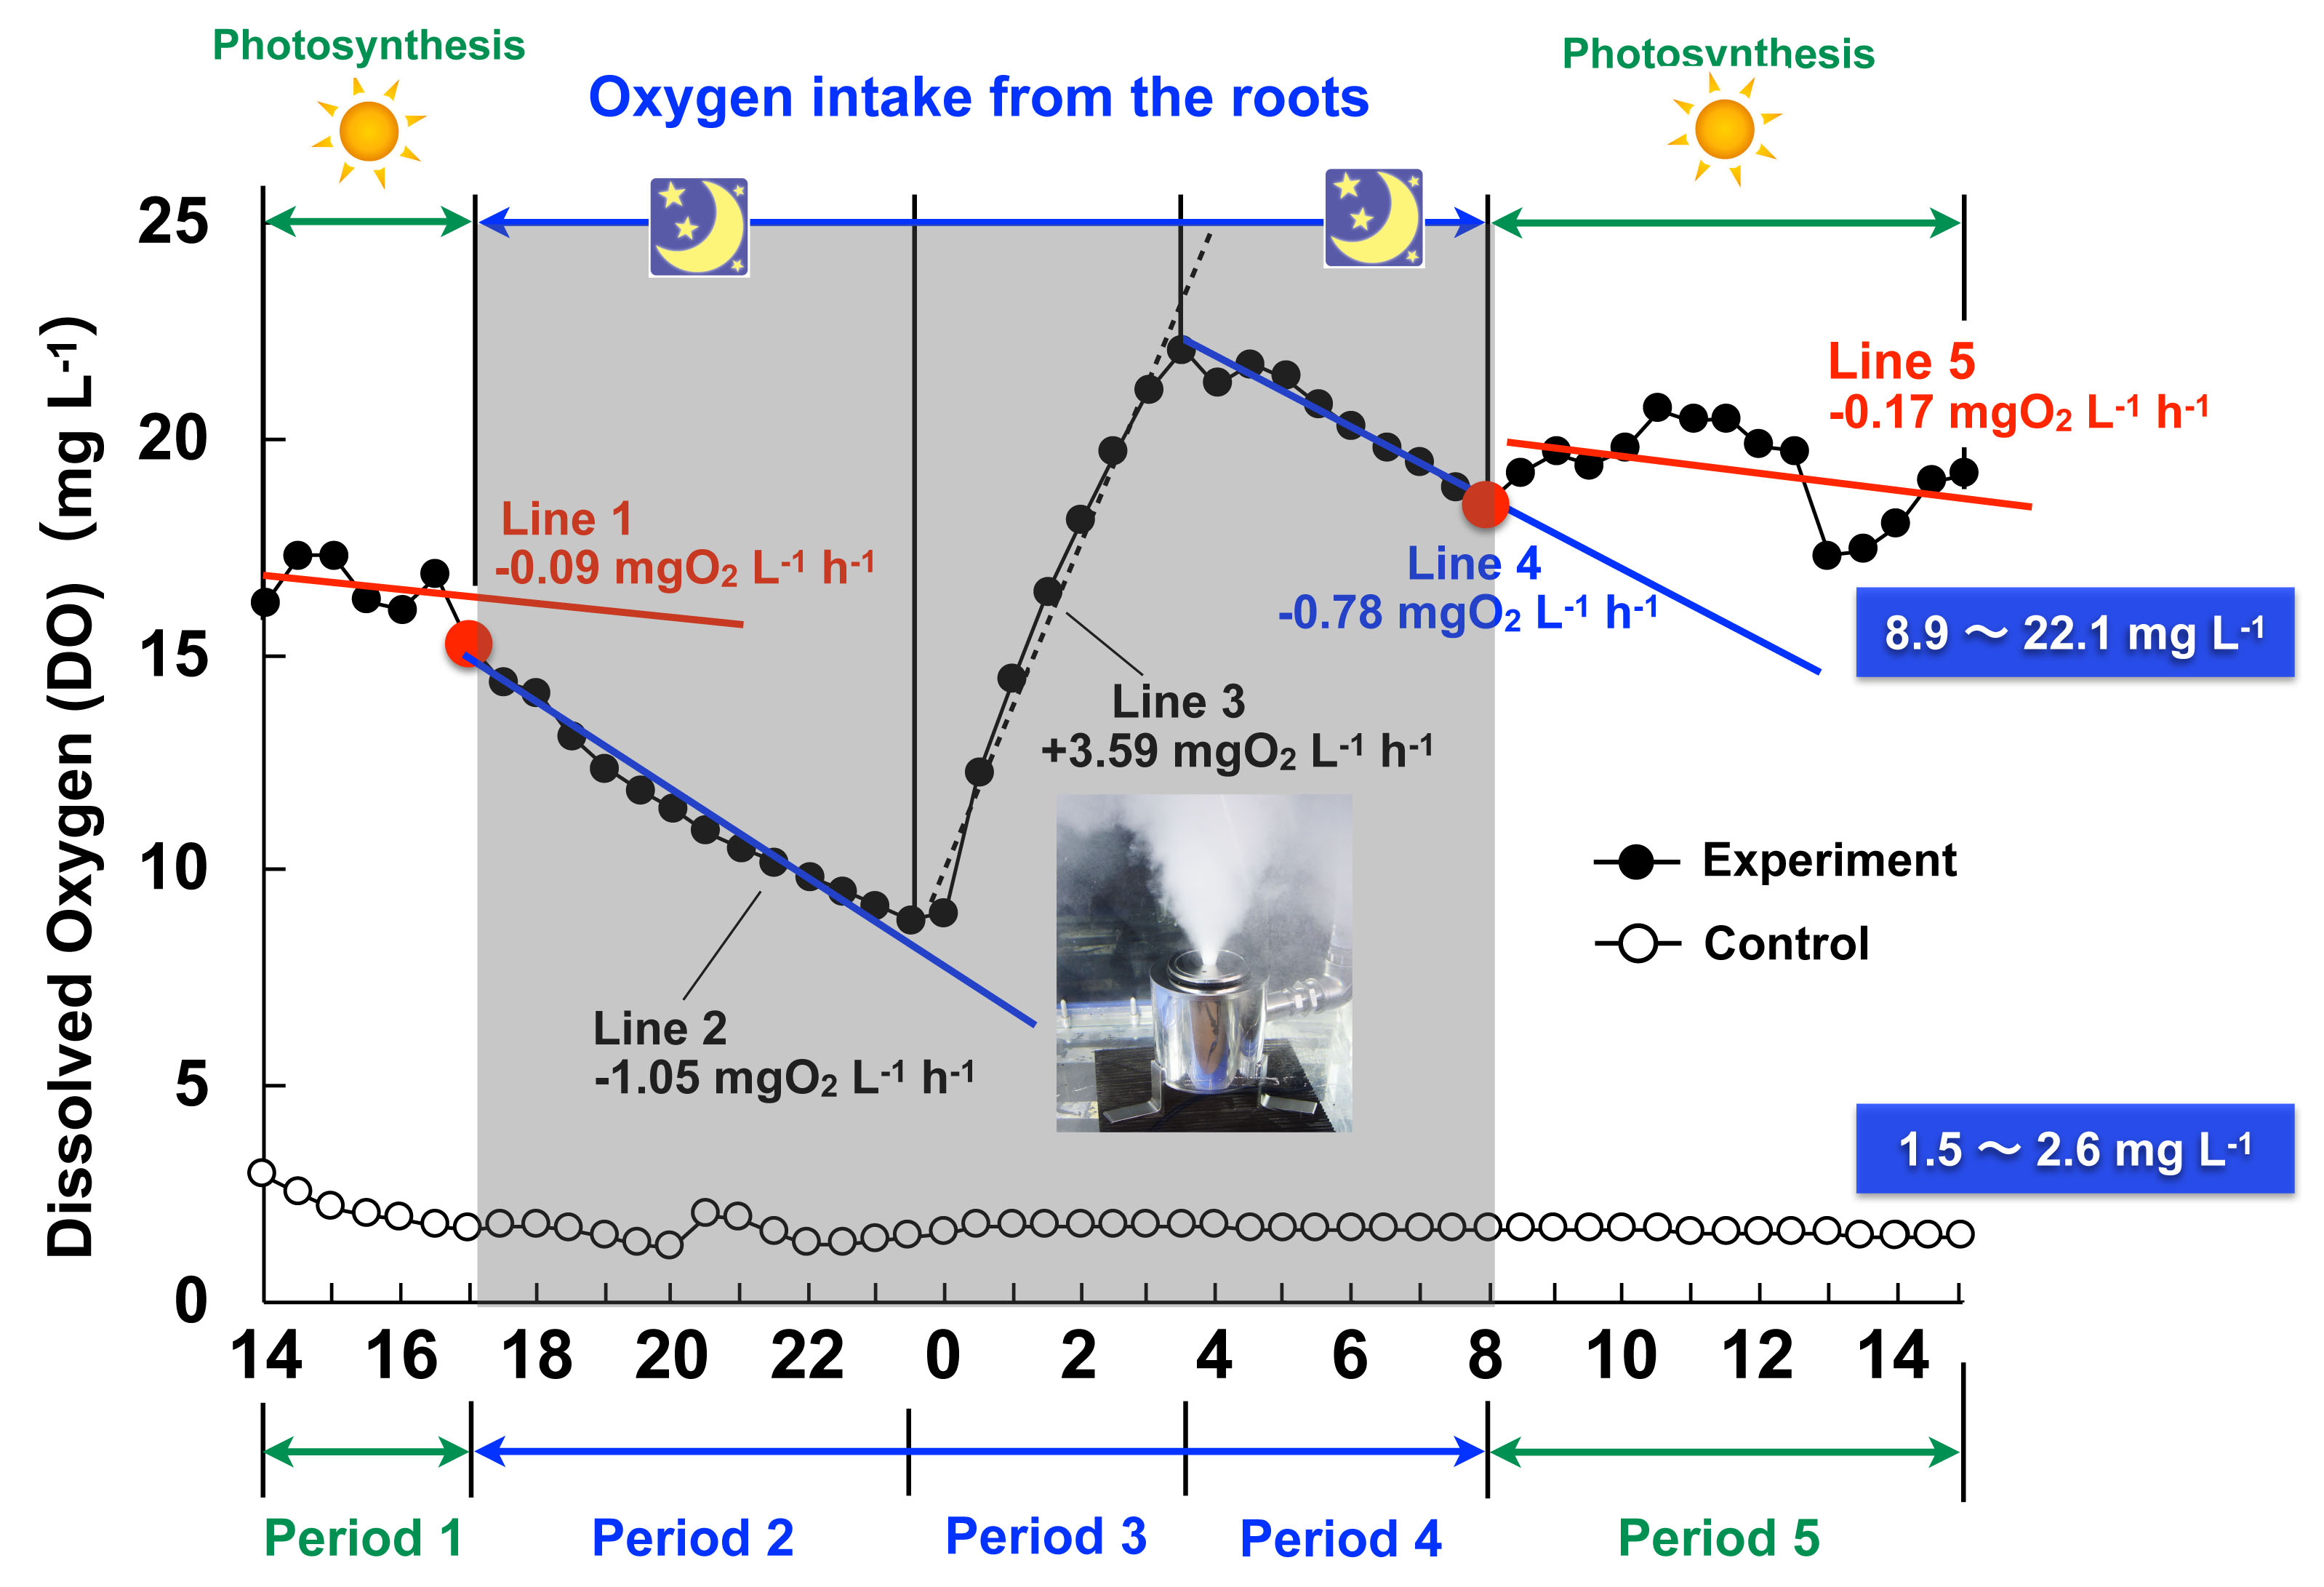 Oxygen fluctuation in the experiment